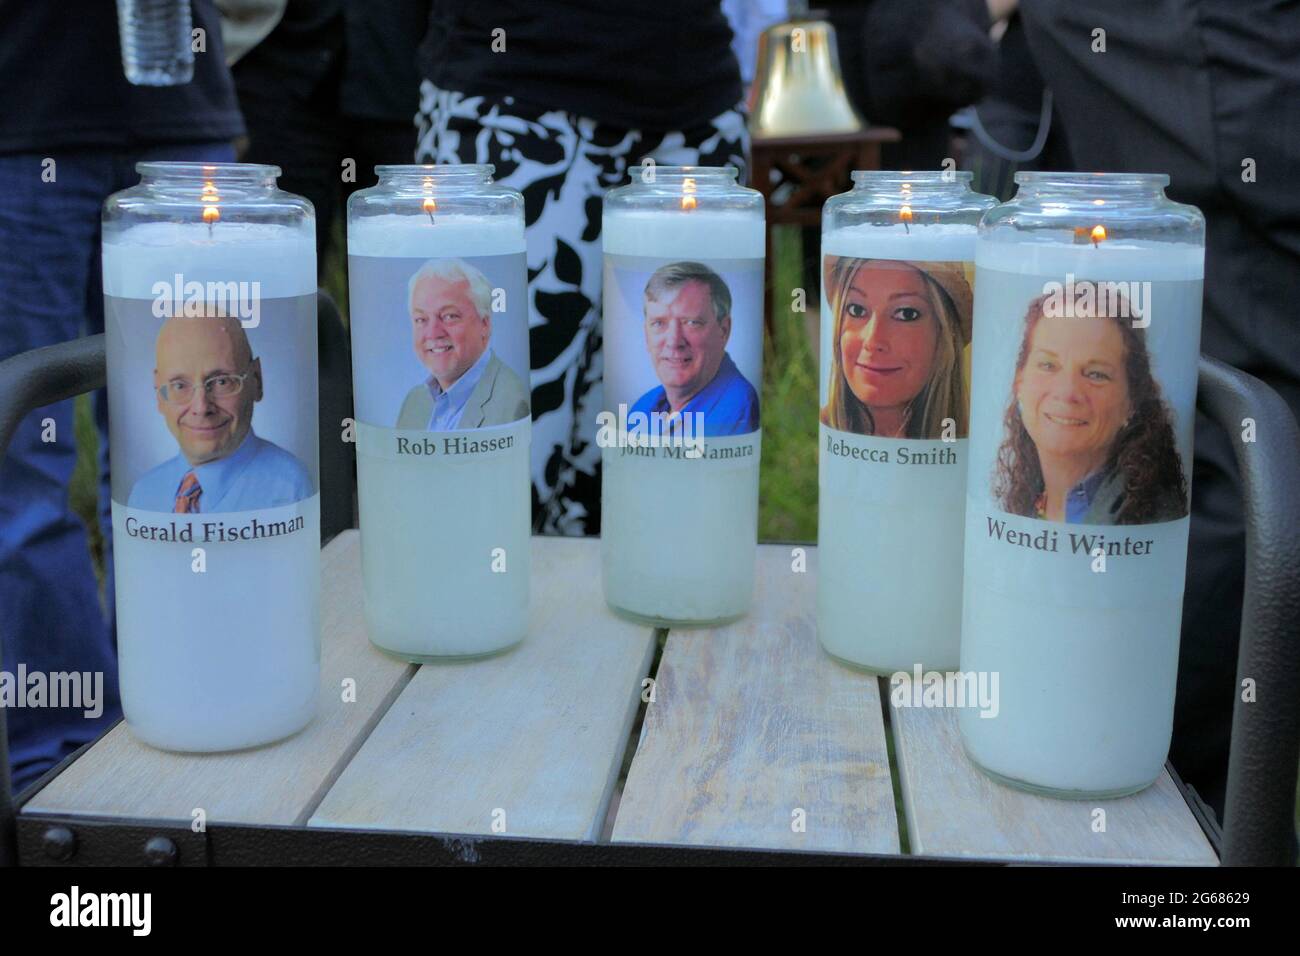 Annapolis, USA. 29th June, 2018. Candles honoring Gerald Fischman, Rob Hiassen, John McNamara, Rebecca Smith, and Wendi Winters flicker as the sun sets during a candlelight vigil on June 29, 2018, at Annapolis Mall for the five Capital Gazette employees slain during a shooting spree in their newsroom. (Photo by Karl Merton Ferron/Baltimore Sun/TNS/Sipa USA) Credit: Sipa USA/Alamy Live News Stock Photo